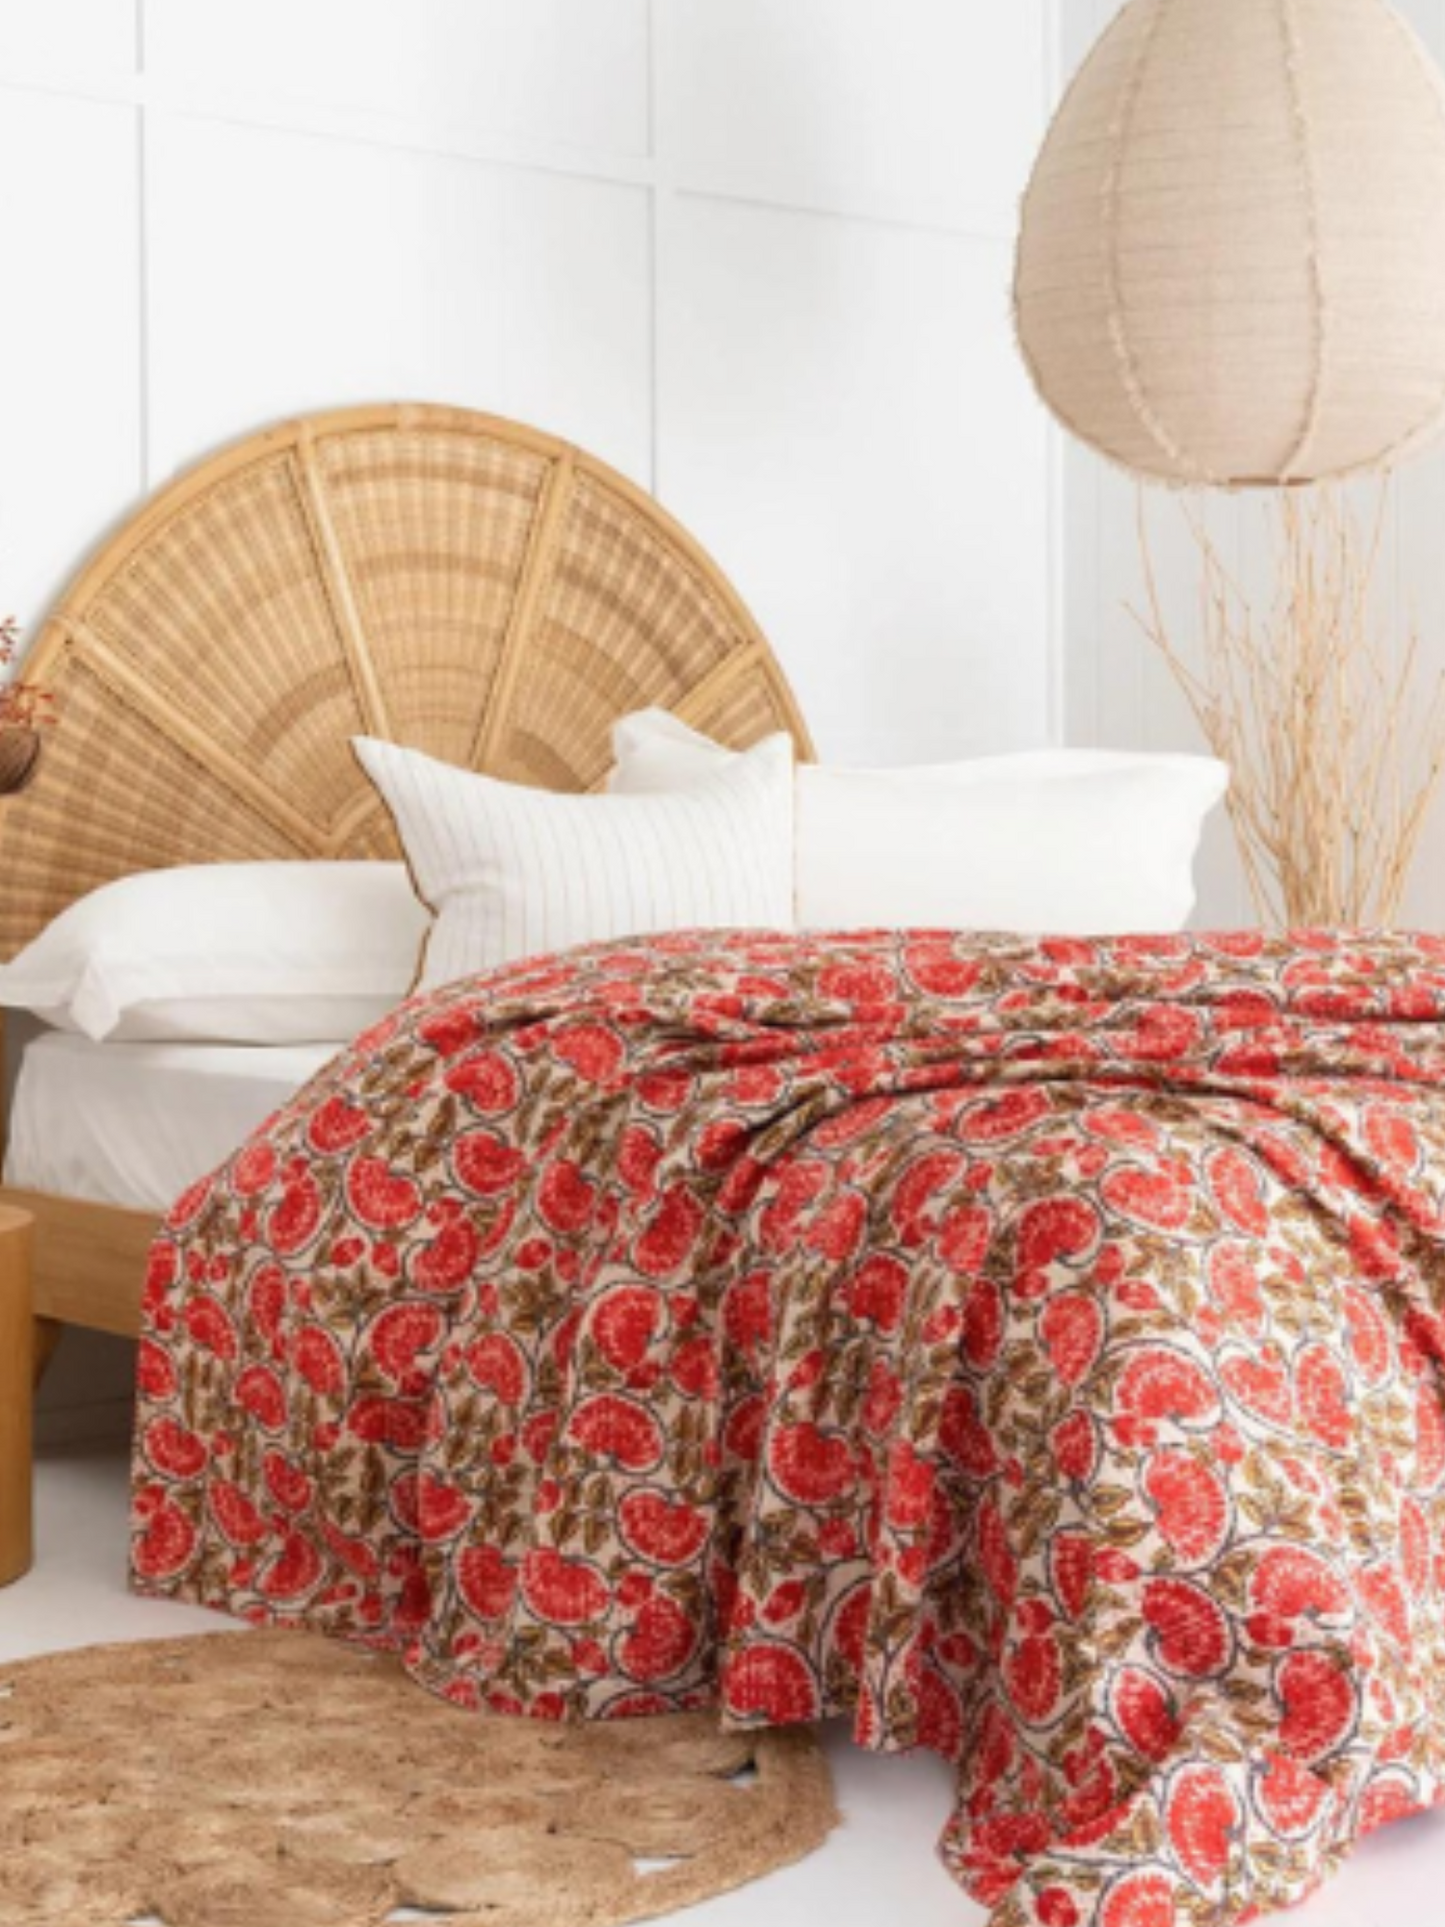 Red Floral Block Print Bedspread with Kantha Stitch